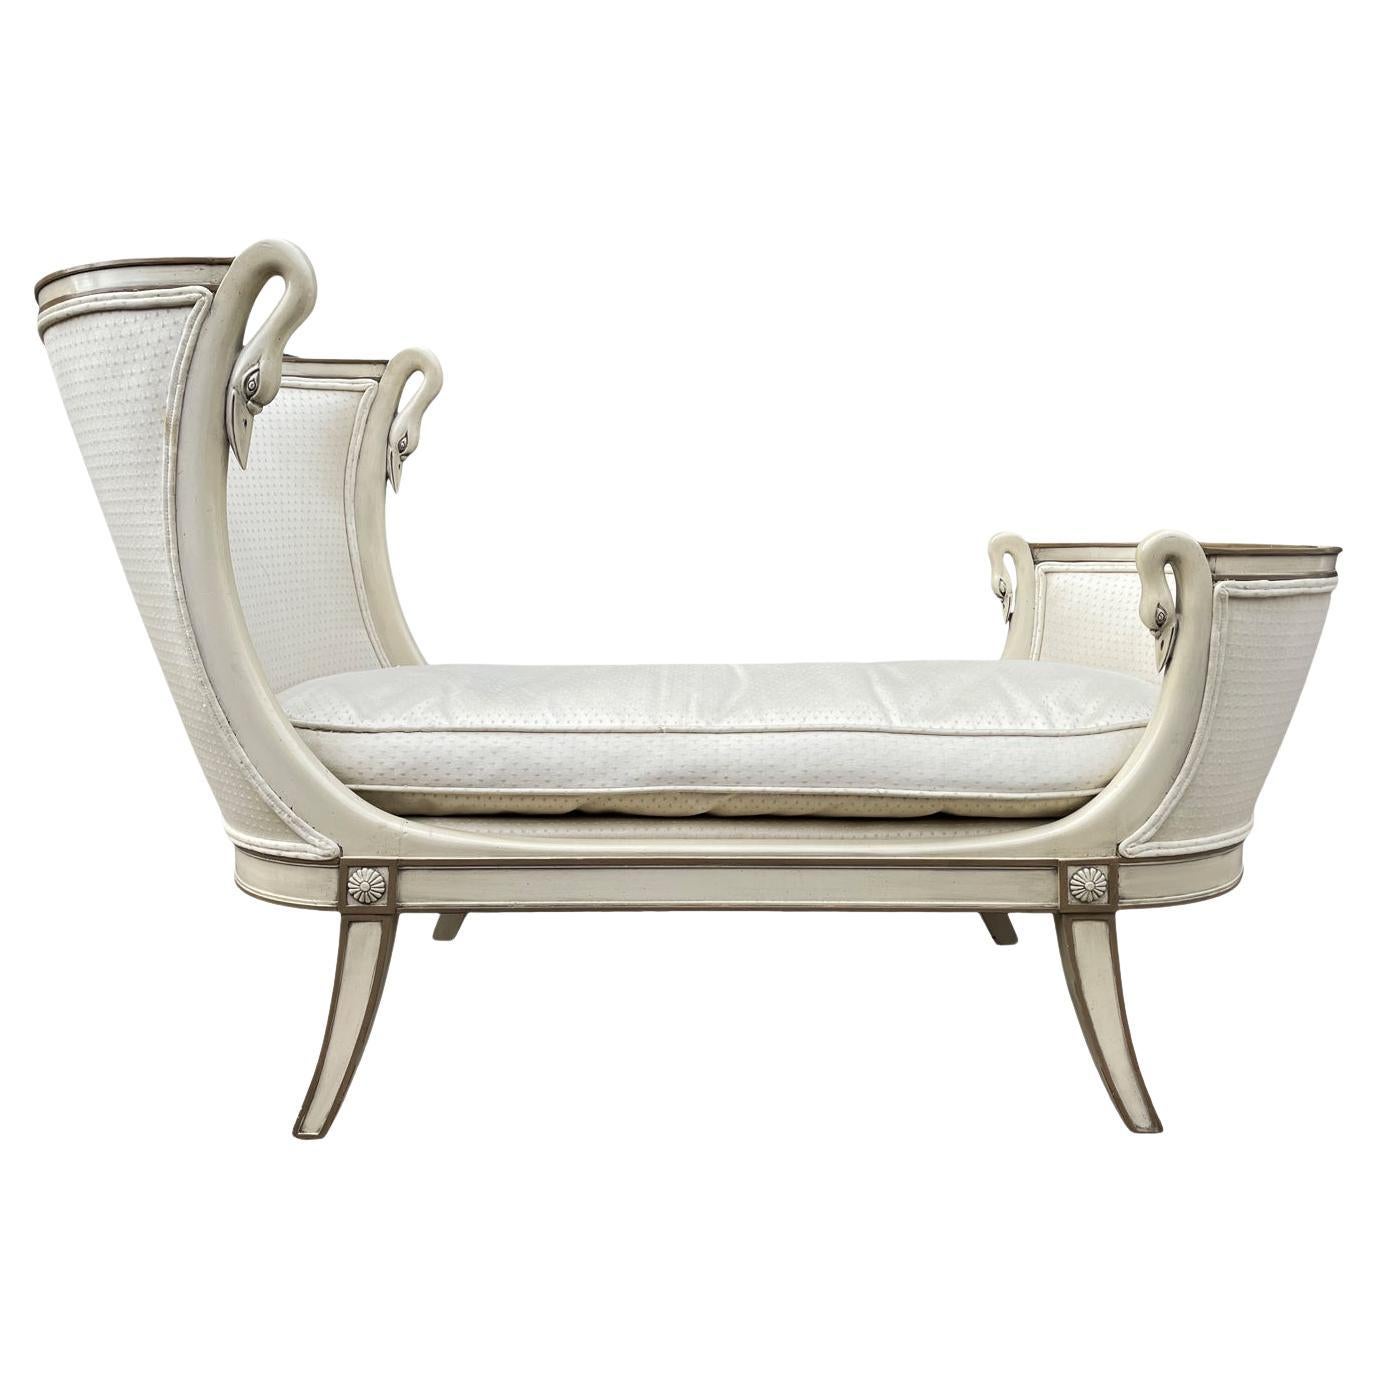 What is a chaise lounge chair?